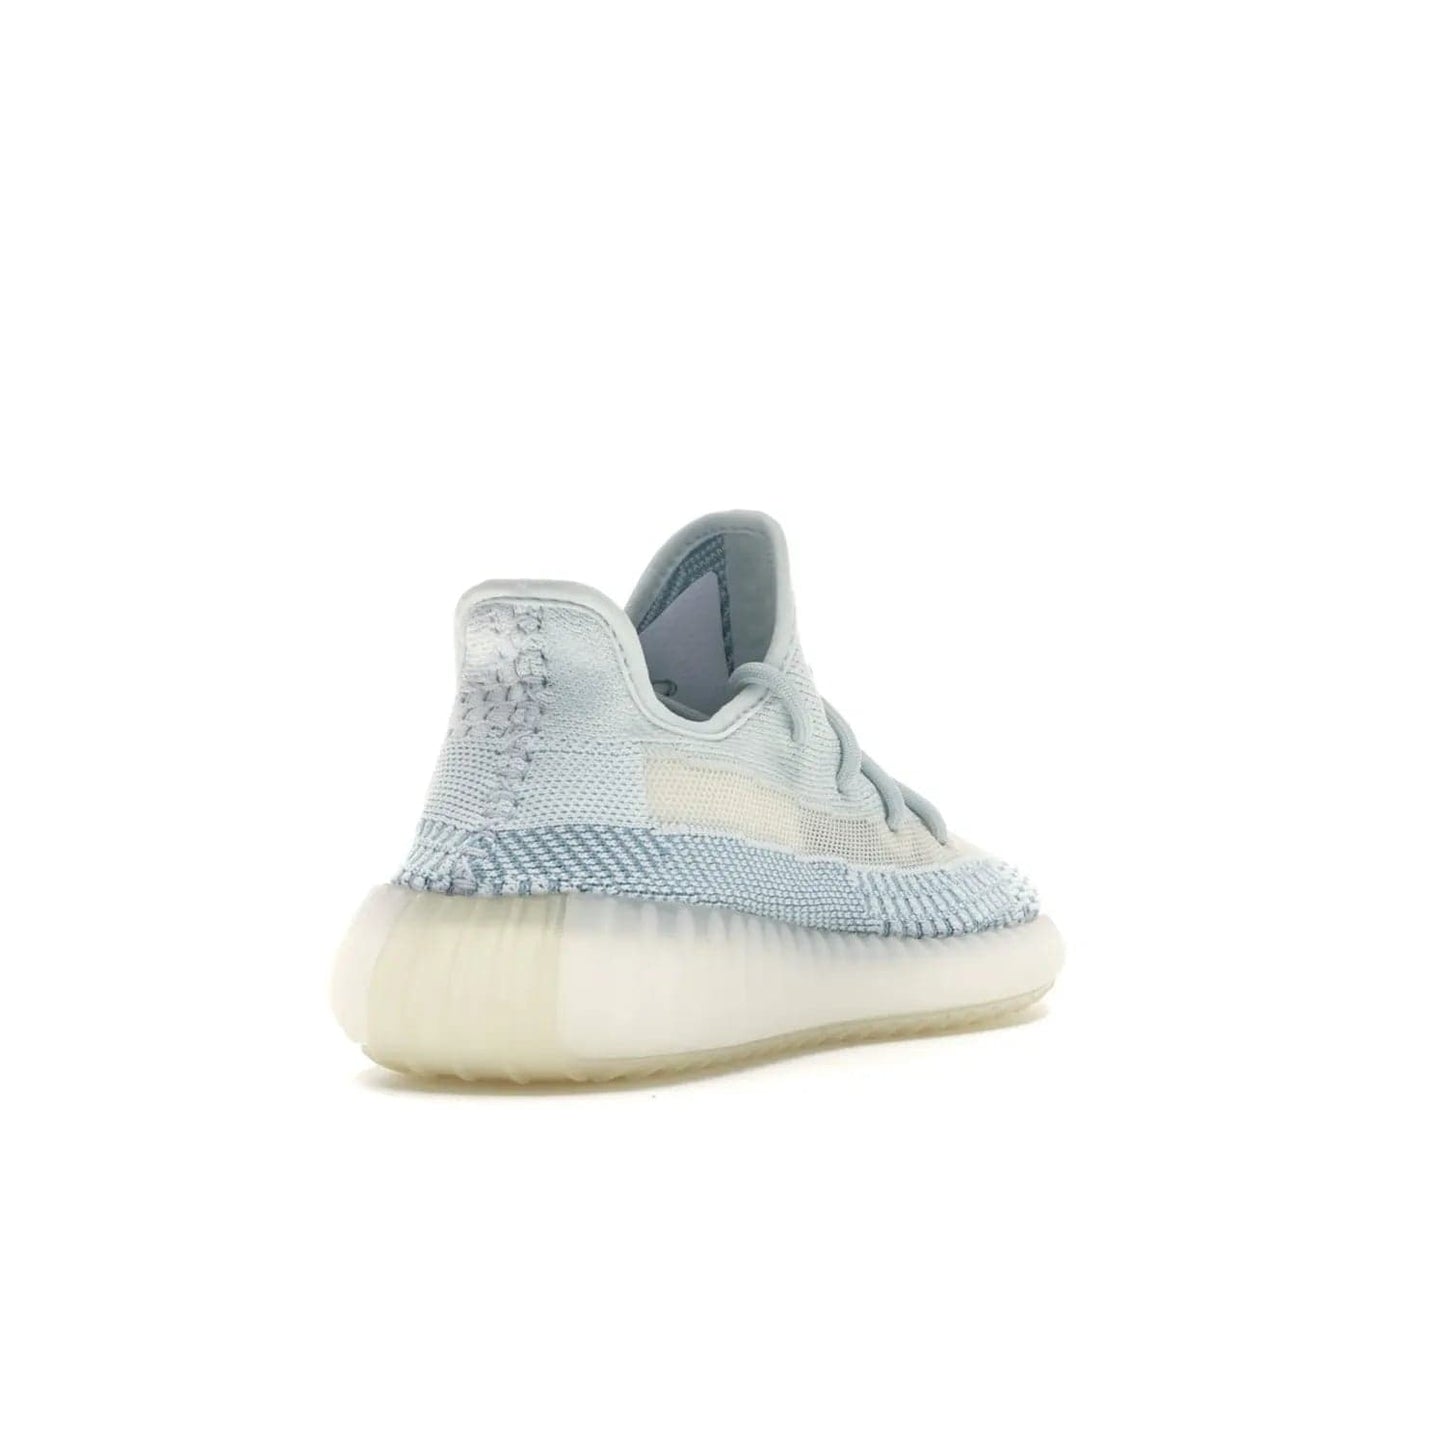 adidas Yeezy Boost 350 V2 Cloud White (Non-Reflective) - Image 31 - Only at www.BallersClubKickz.com - Uniquely designed adidas Yeezy Boost 350 V2 Cloud White (Non-Reflective) with a Primeknit upper in shades of cream and blue with a contrasting hard sole. A fashion-forward sneaker with a transparent strip and blue-and-white patterns.